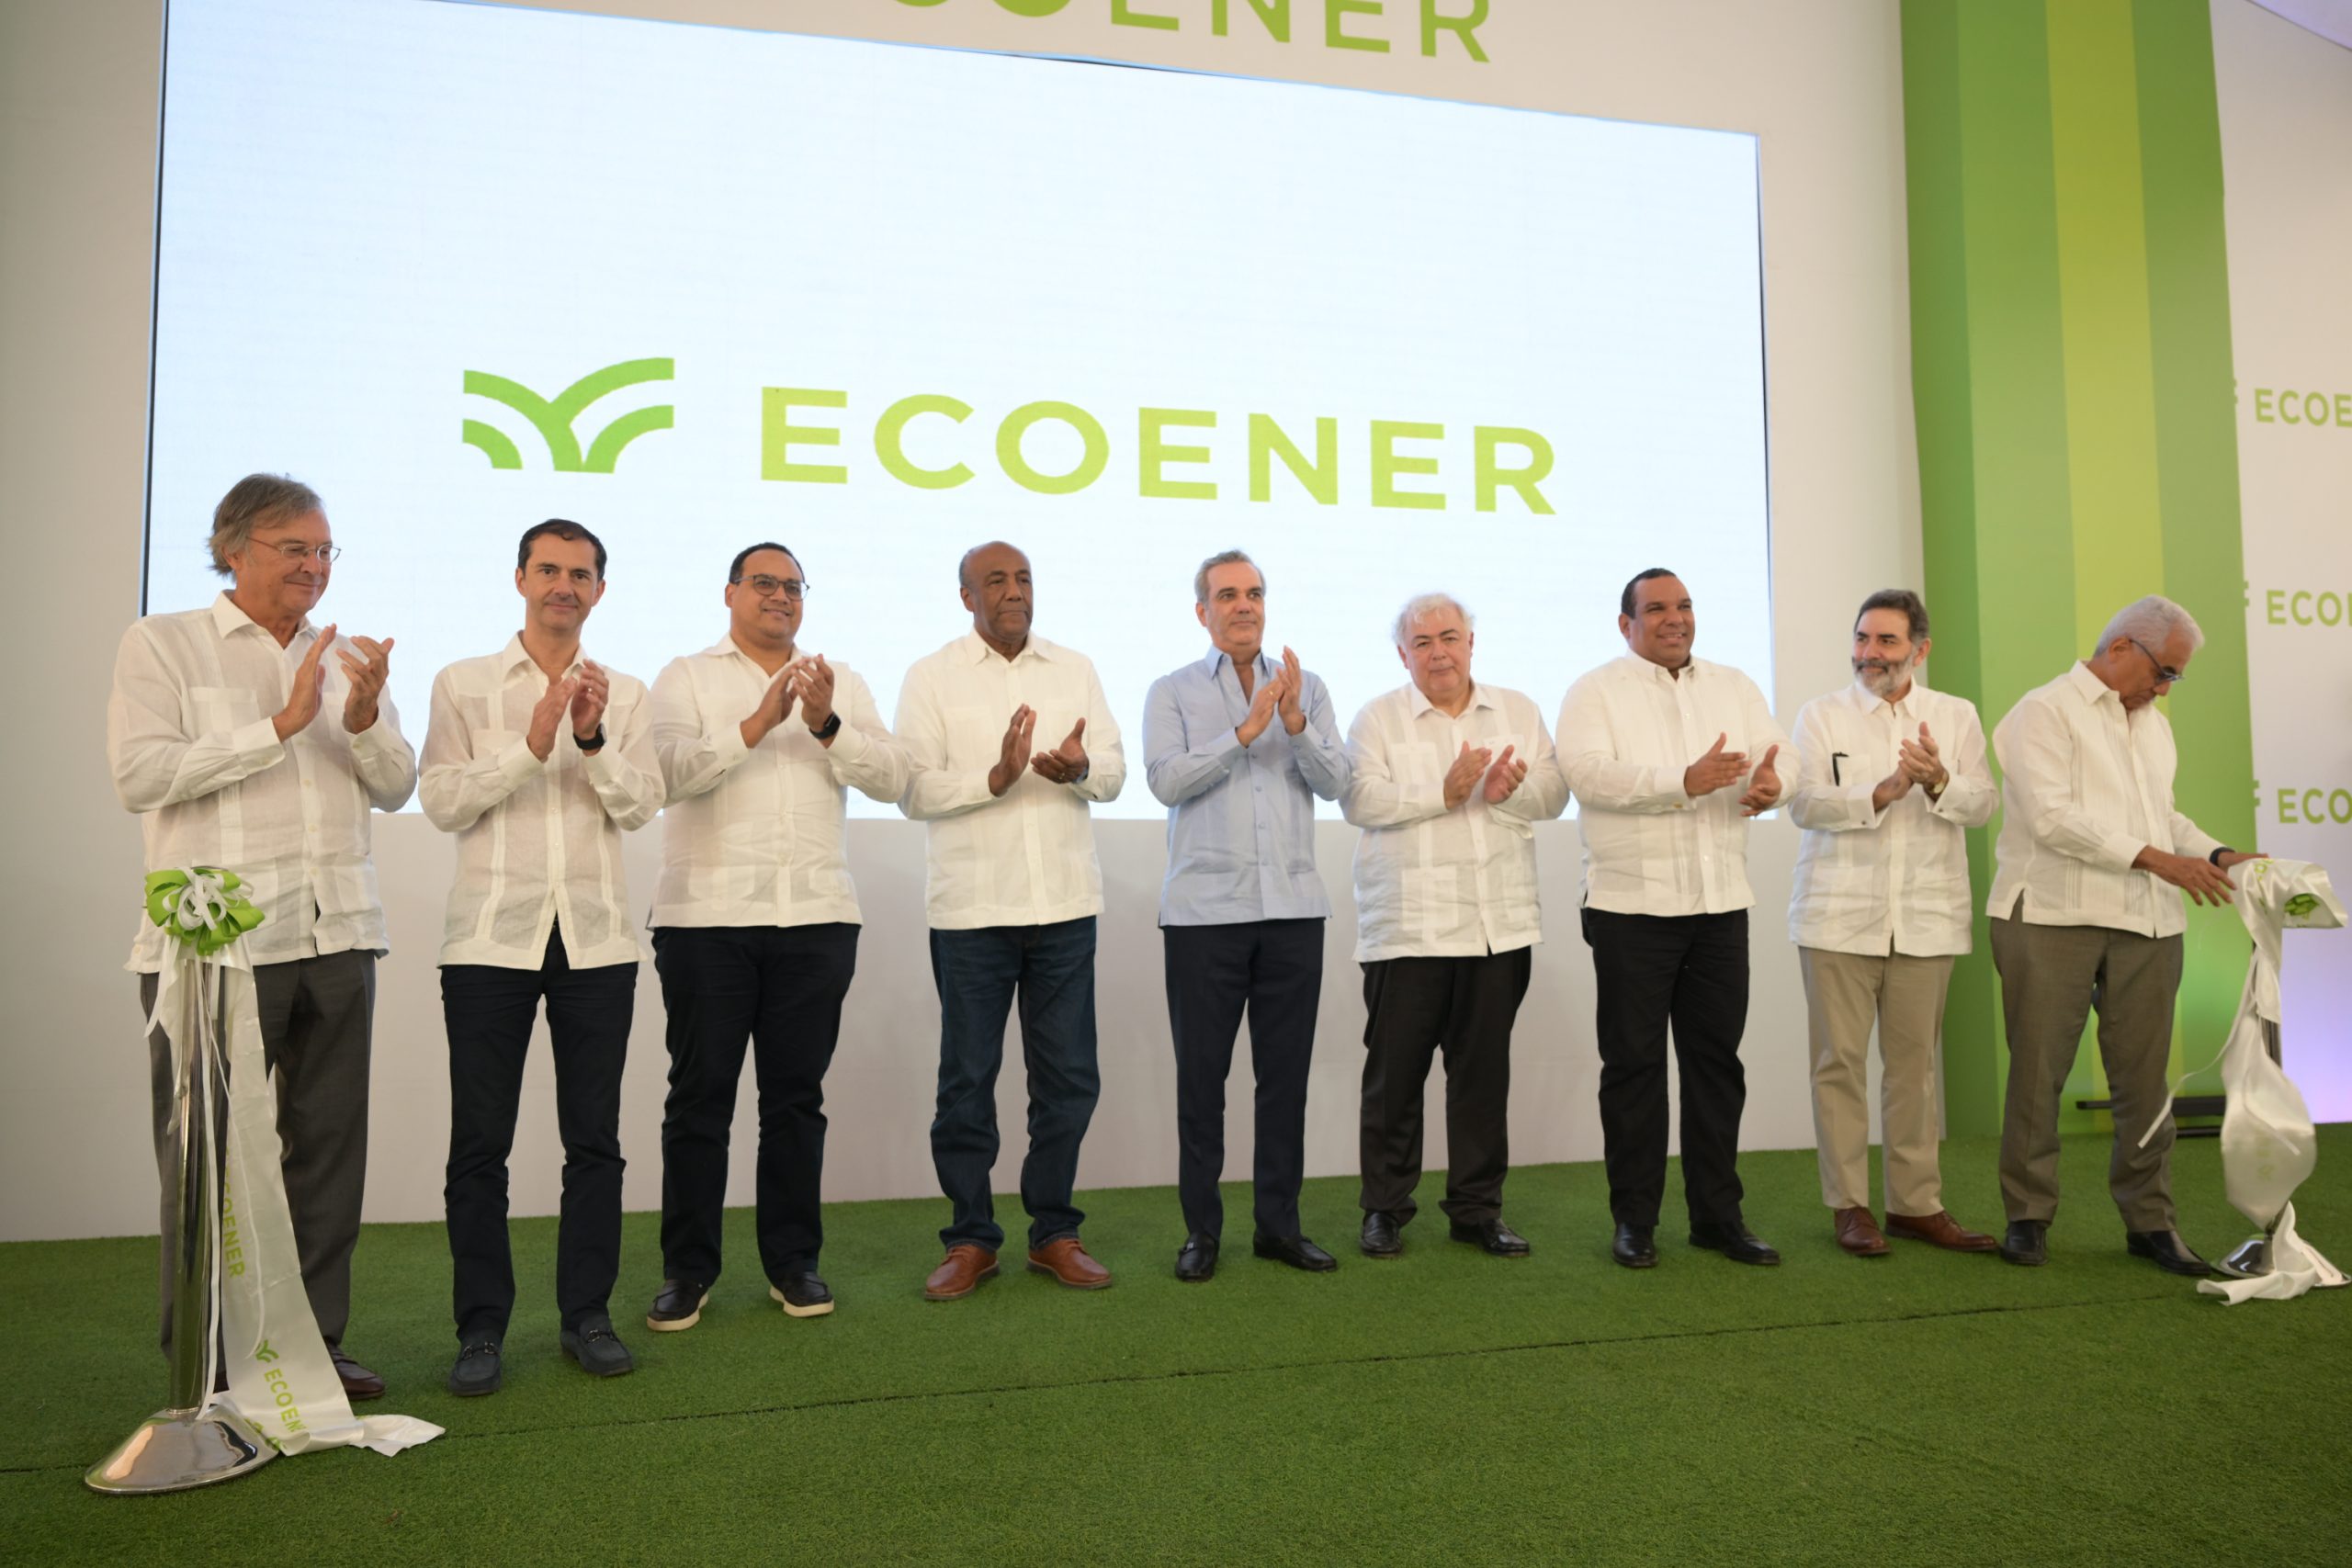 Ecoener expects to have 279 MW in operation in the Dominican Republic by 2024